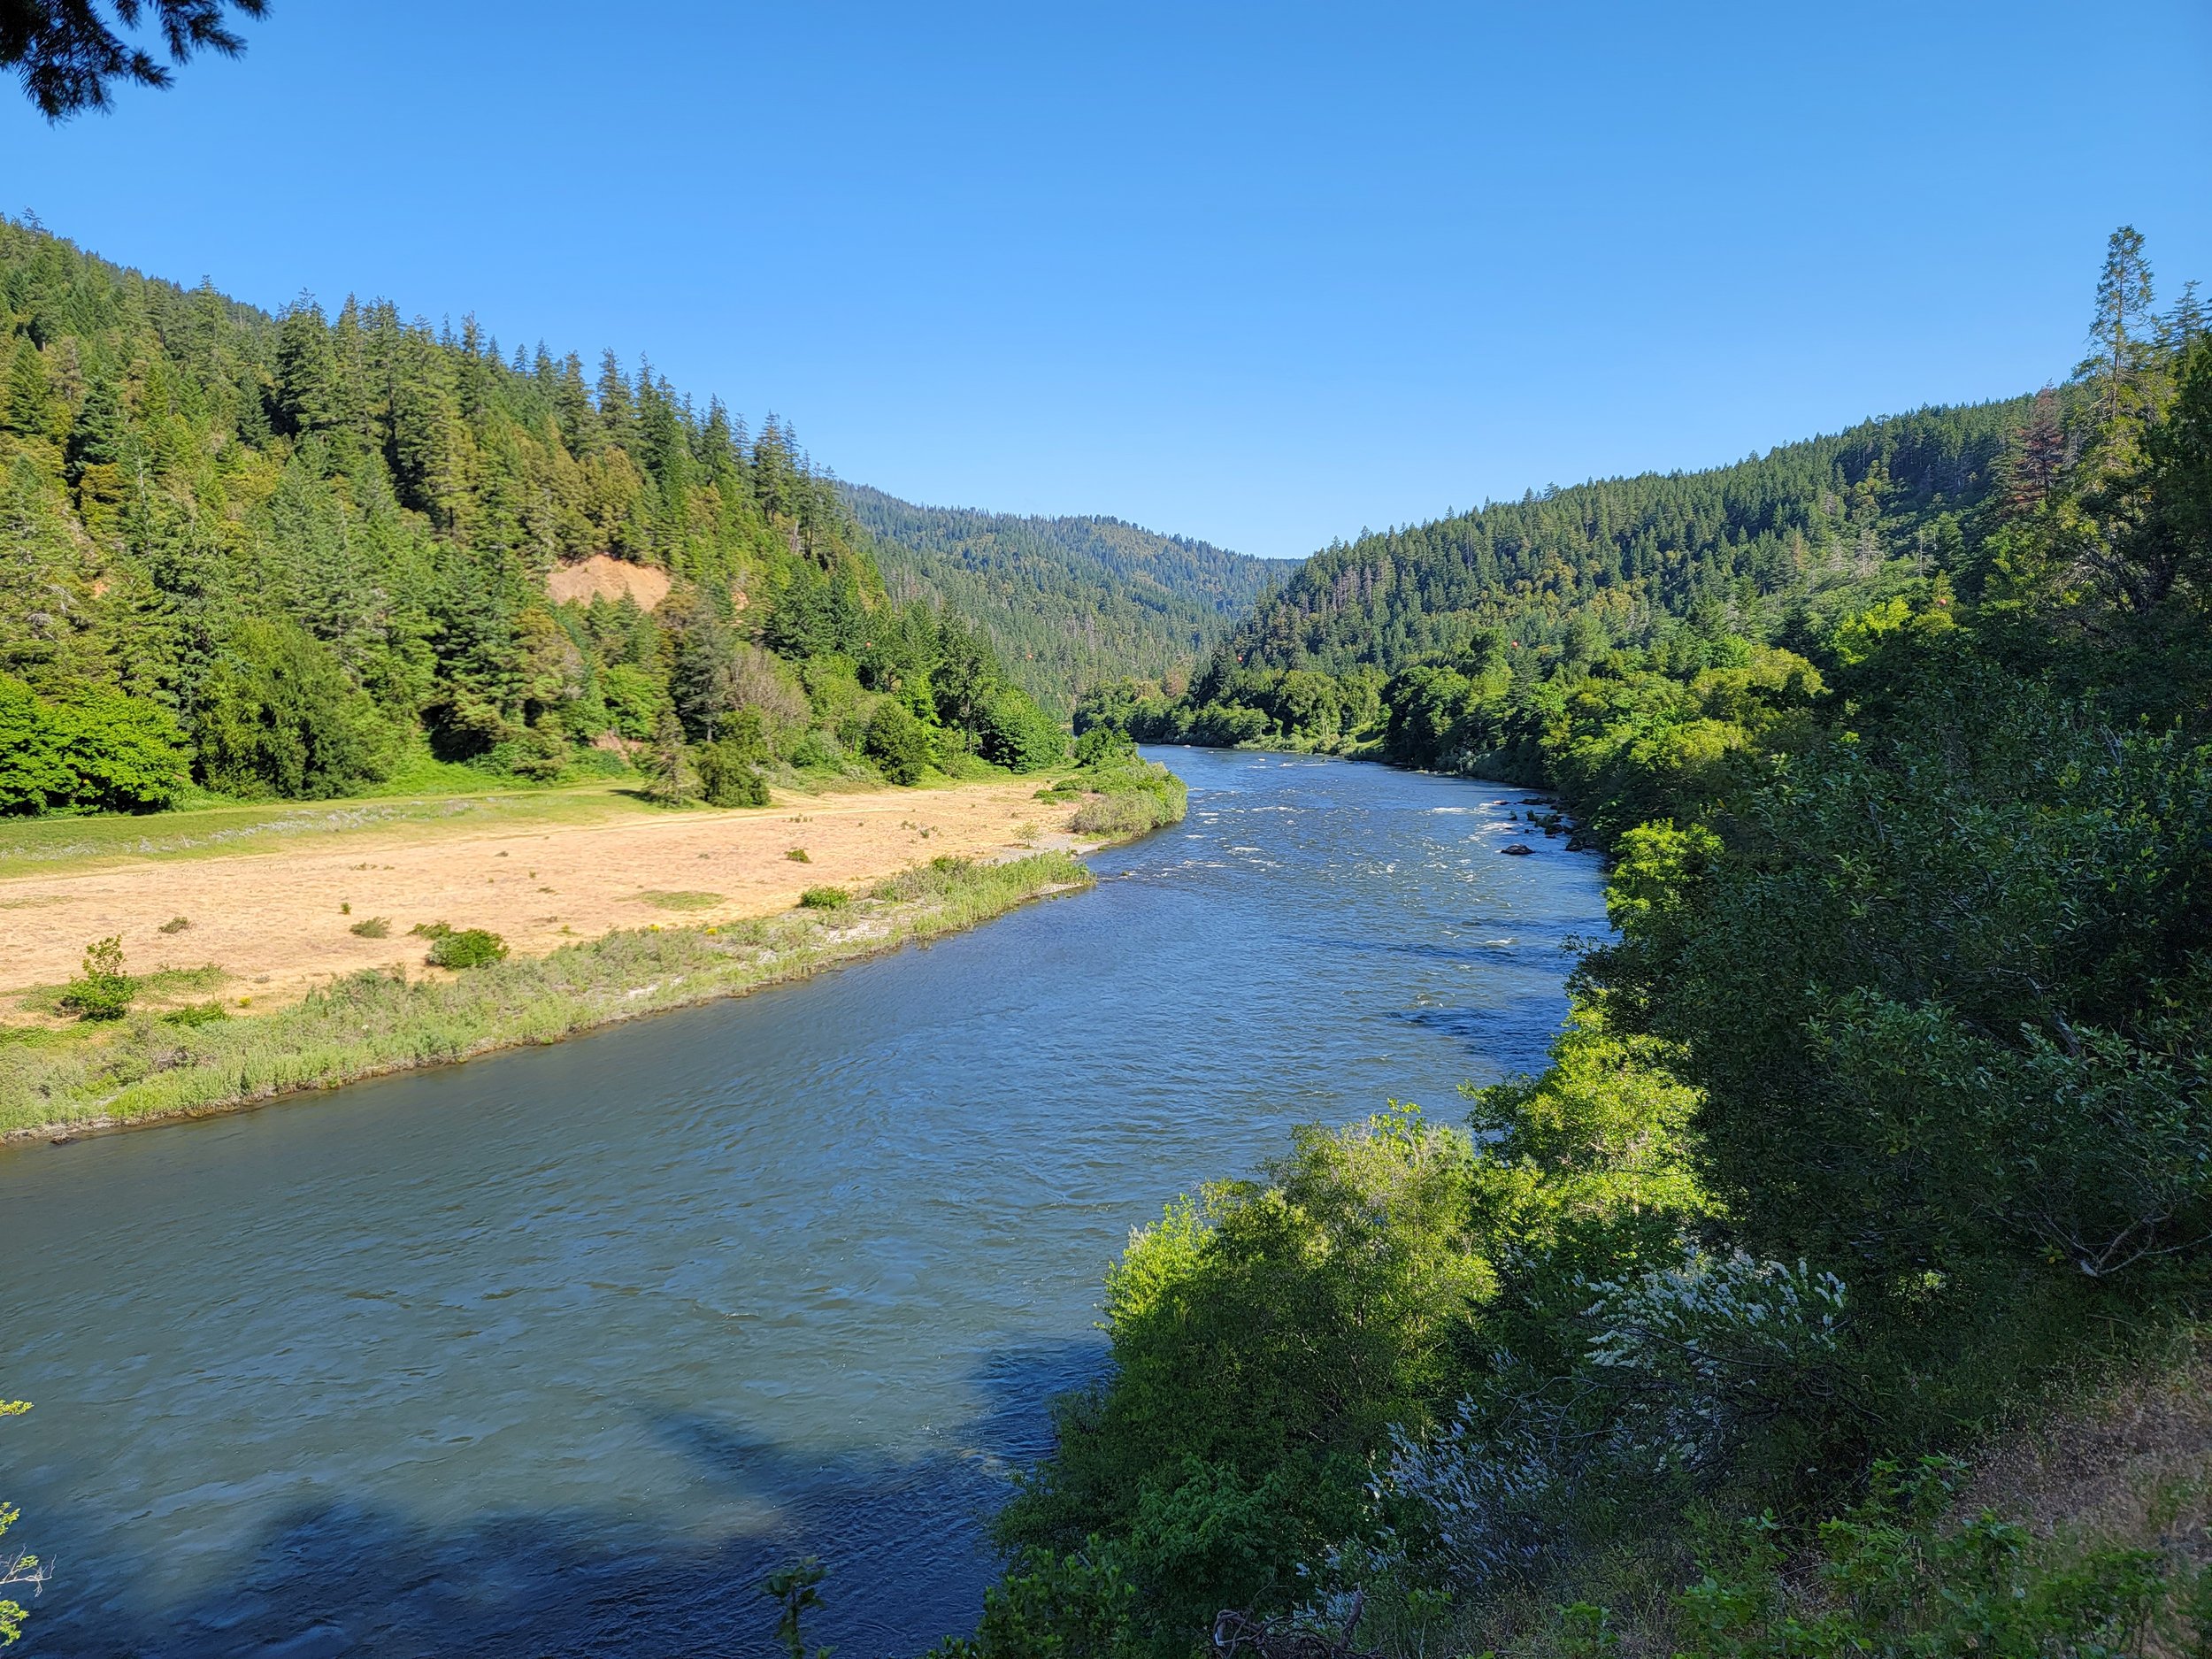  To get to the climb you need to take this small winding road along the Rogue River. 